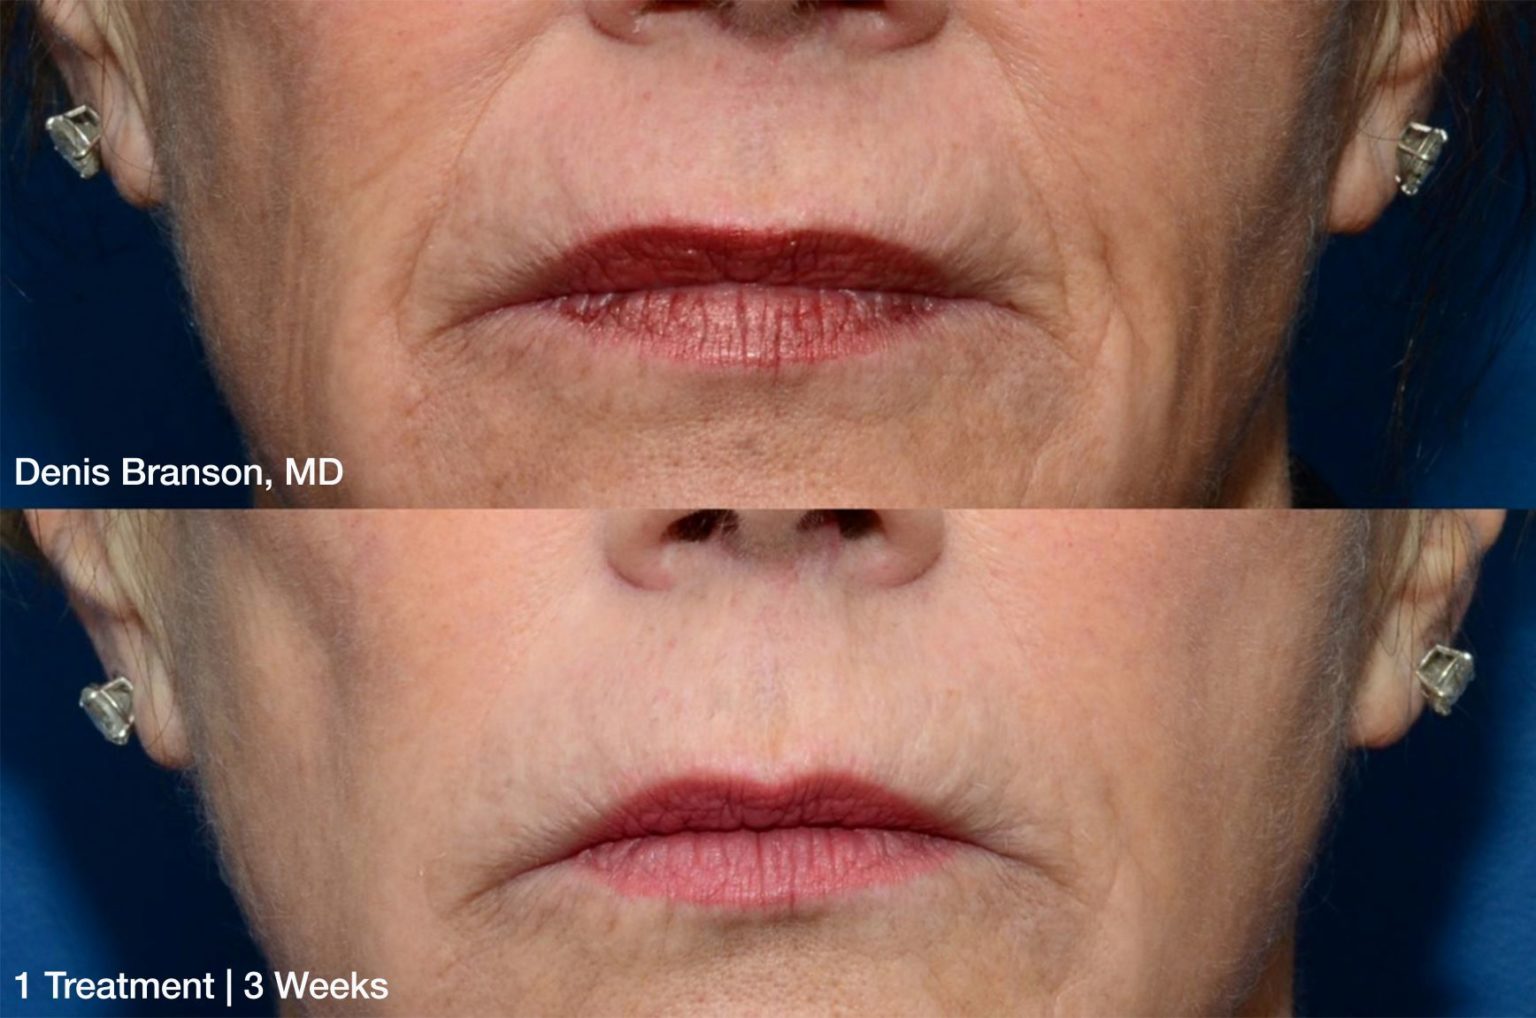 Denis Branson ThermiSmooth Face Mouth 1 treatment 3 weeks Patient 2 1536x1018 1